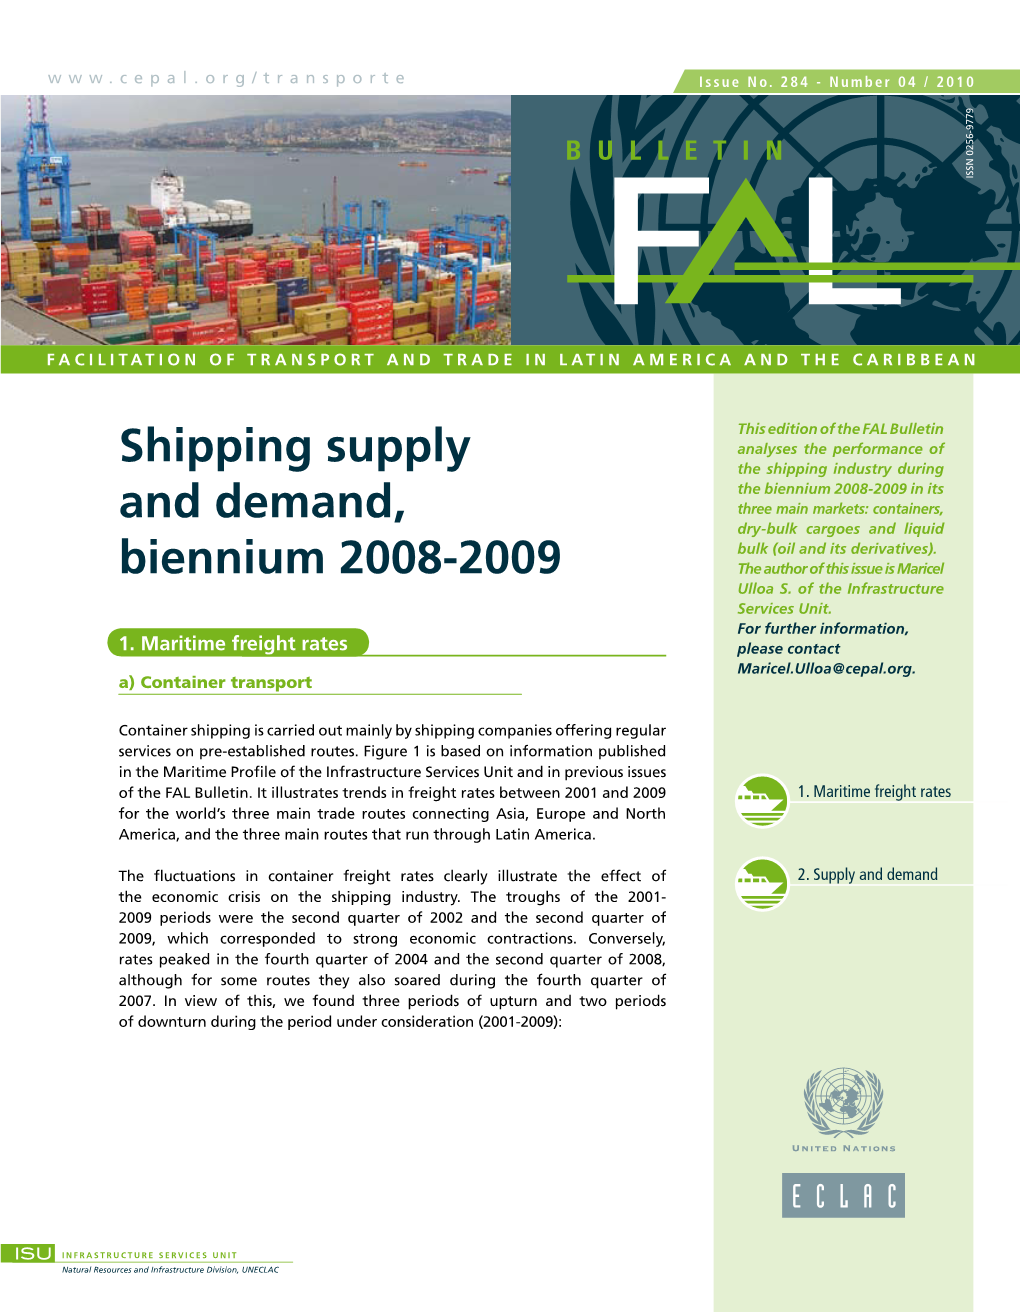 Shipping Supply and Demand, Biennium 2008-2009